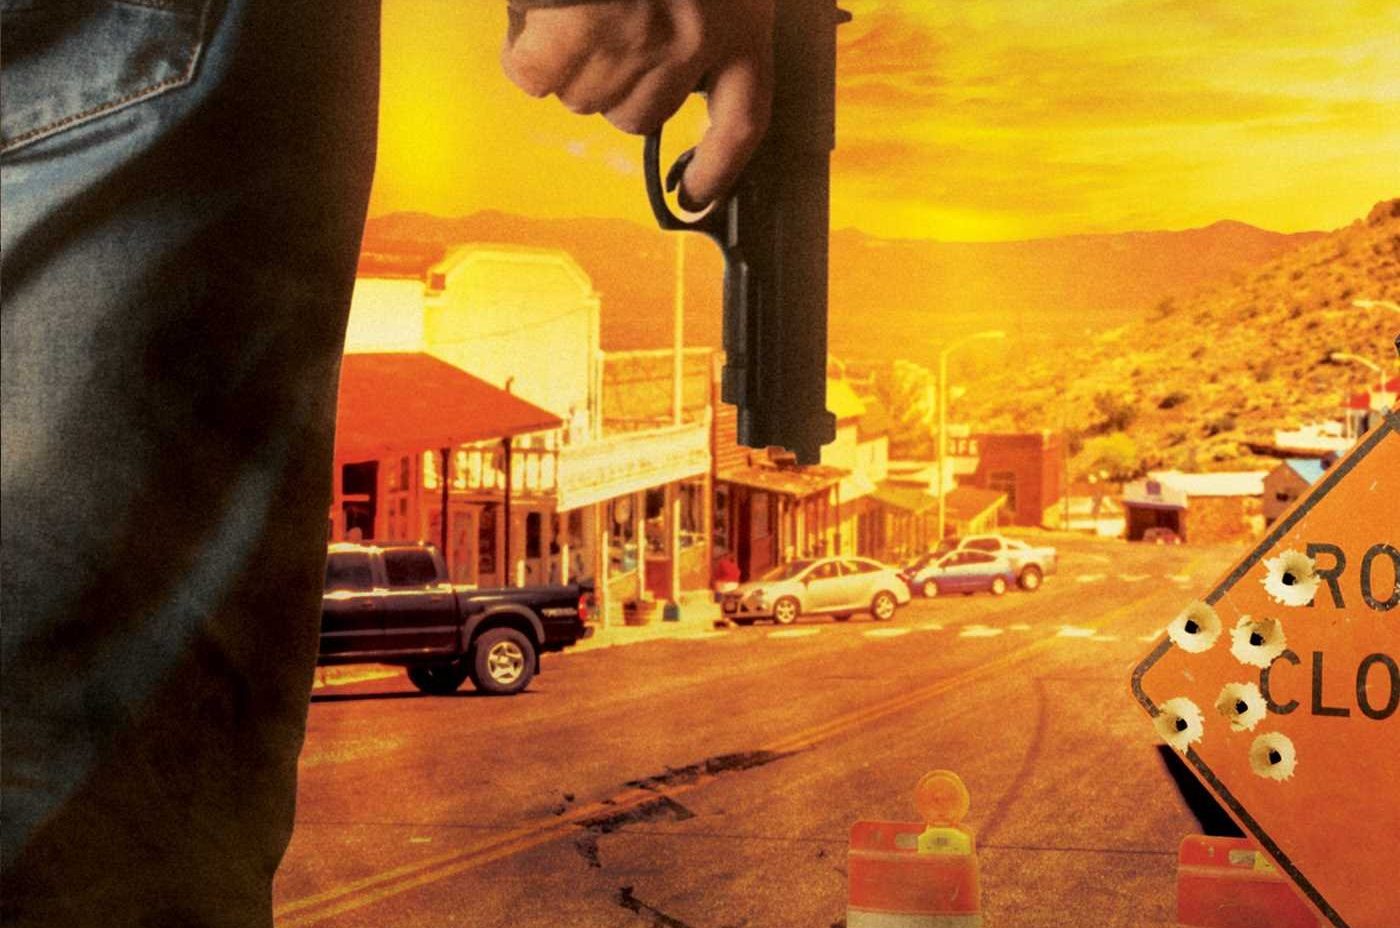 Stephen King’s Roadwork Adaptation Coming From Team Behind IT